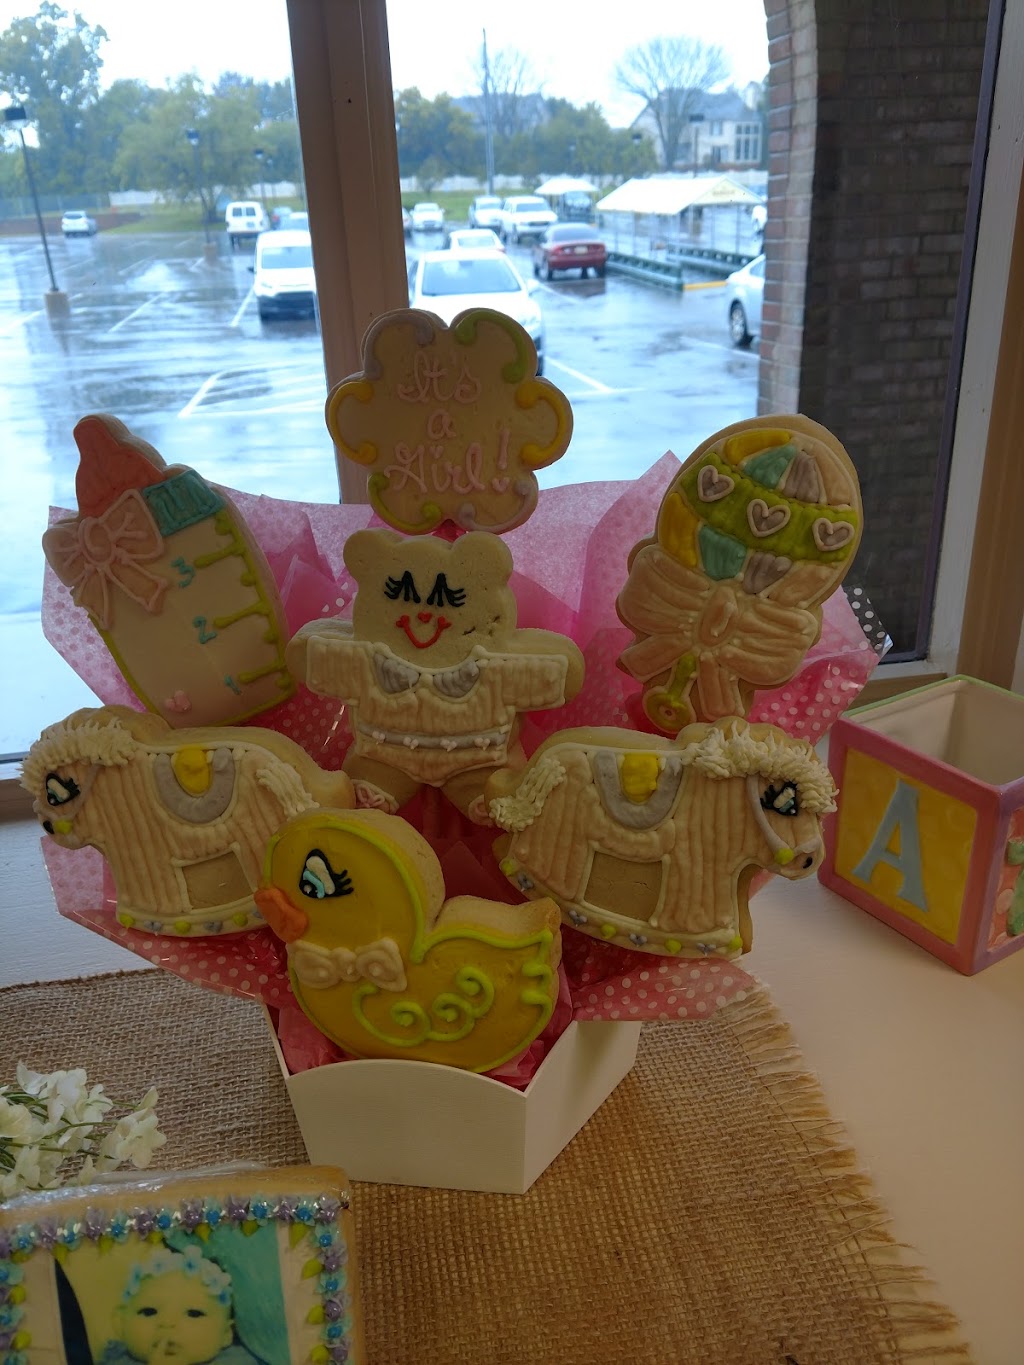 Cookies & Cupcake By Design | 33250 W 14 Mile Rd, West Bloomfield Township, MI 48322, USA | Phone: (248) 539-4029